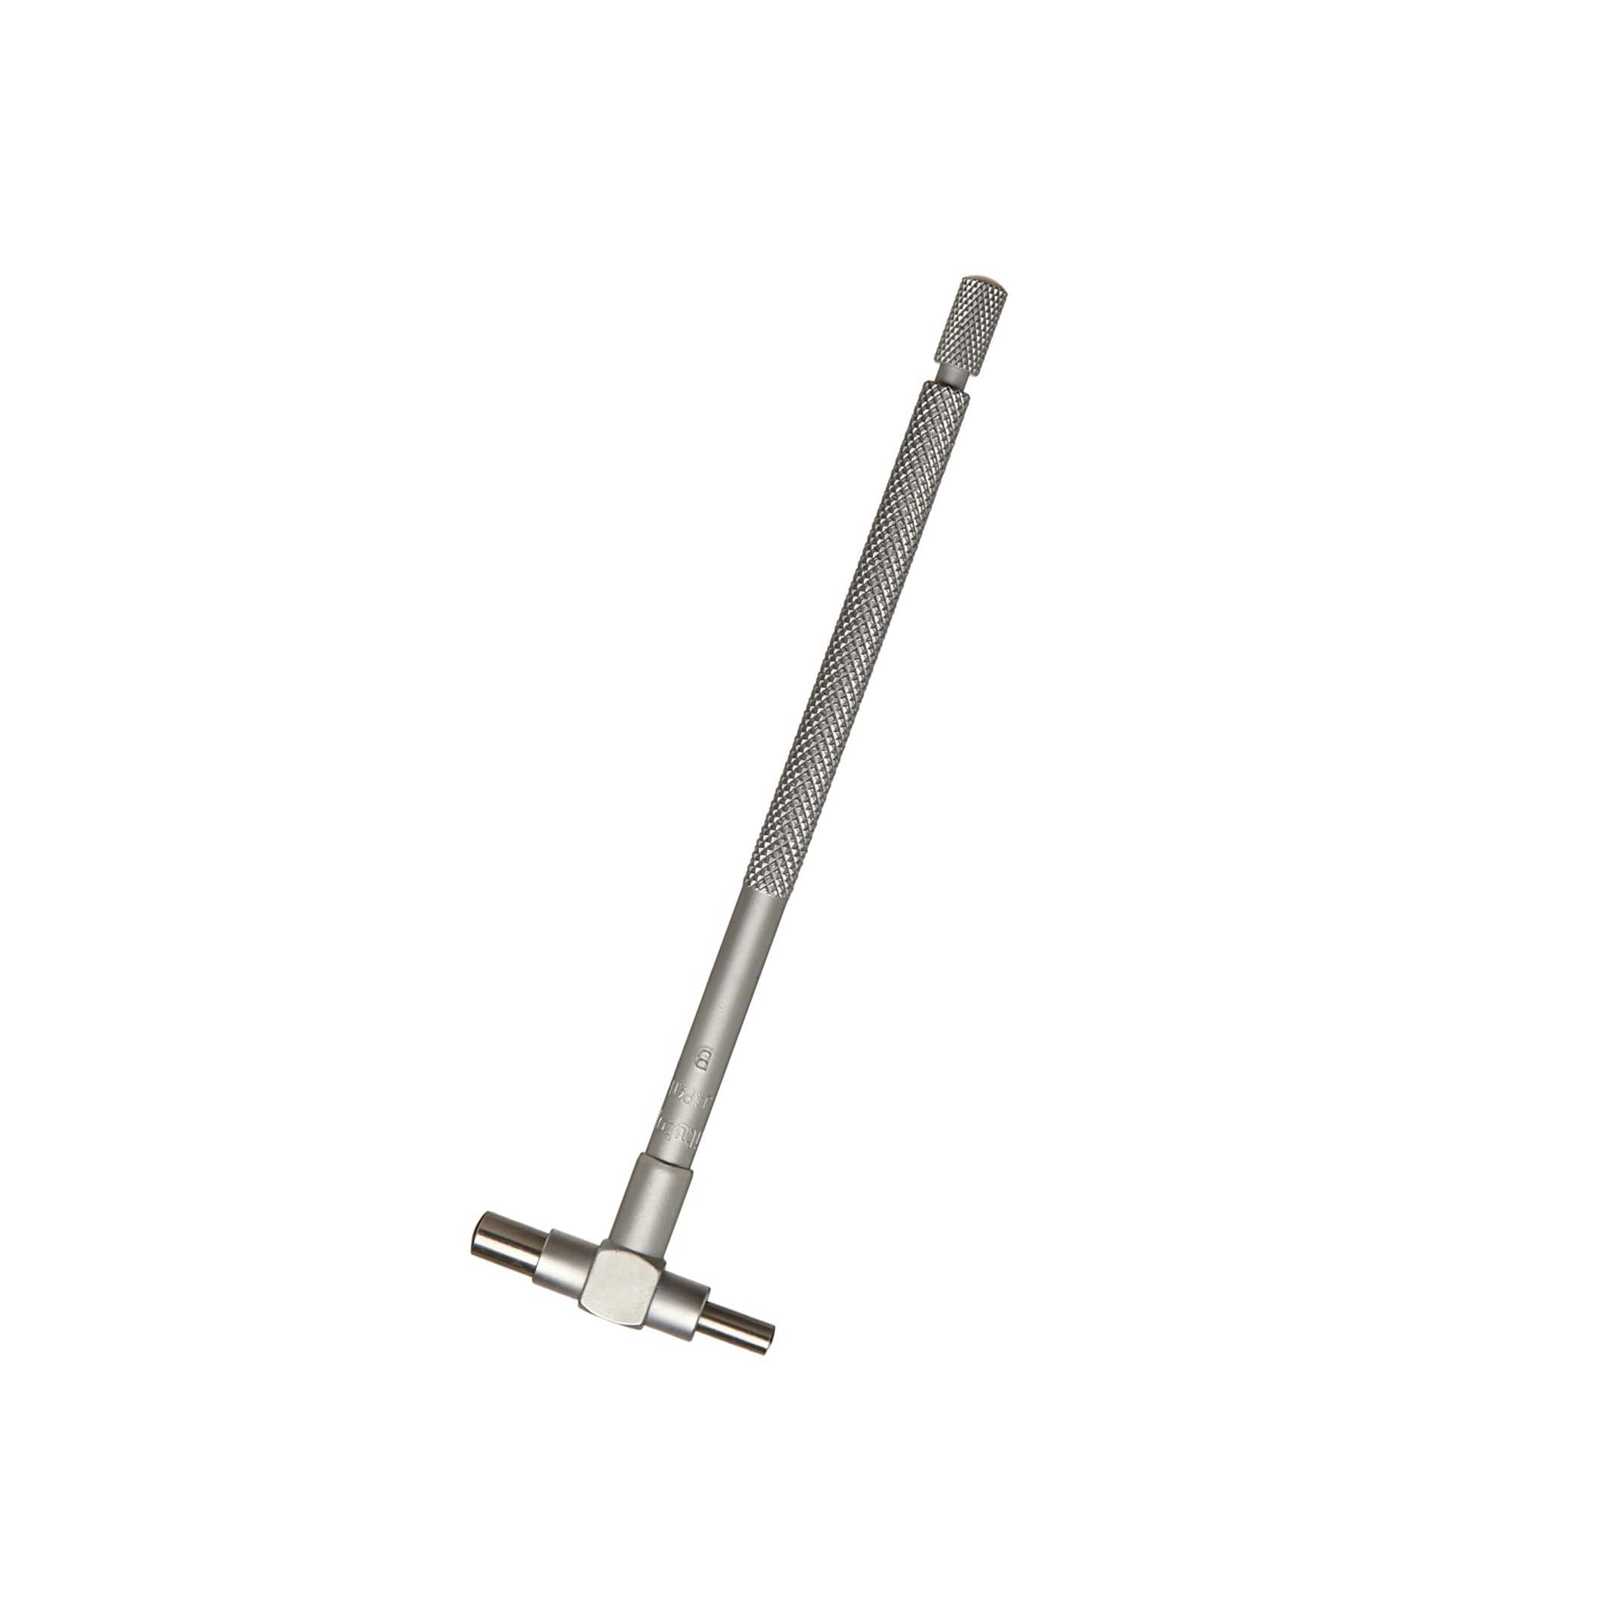 155-123, 3/4 To 1-1/4 Telescoping Gage